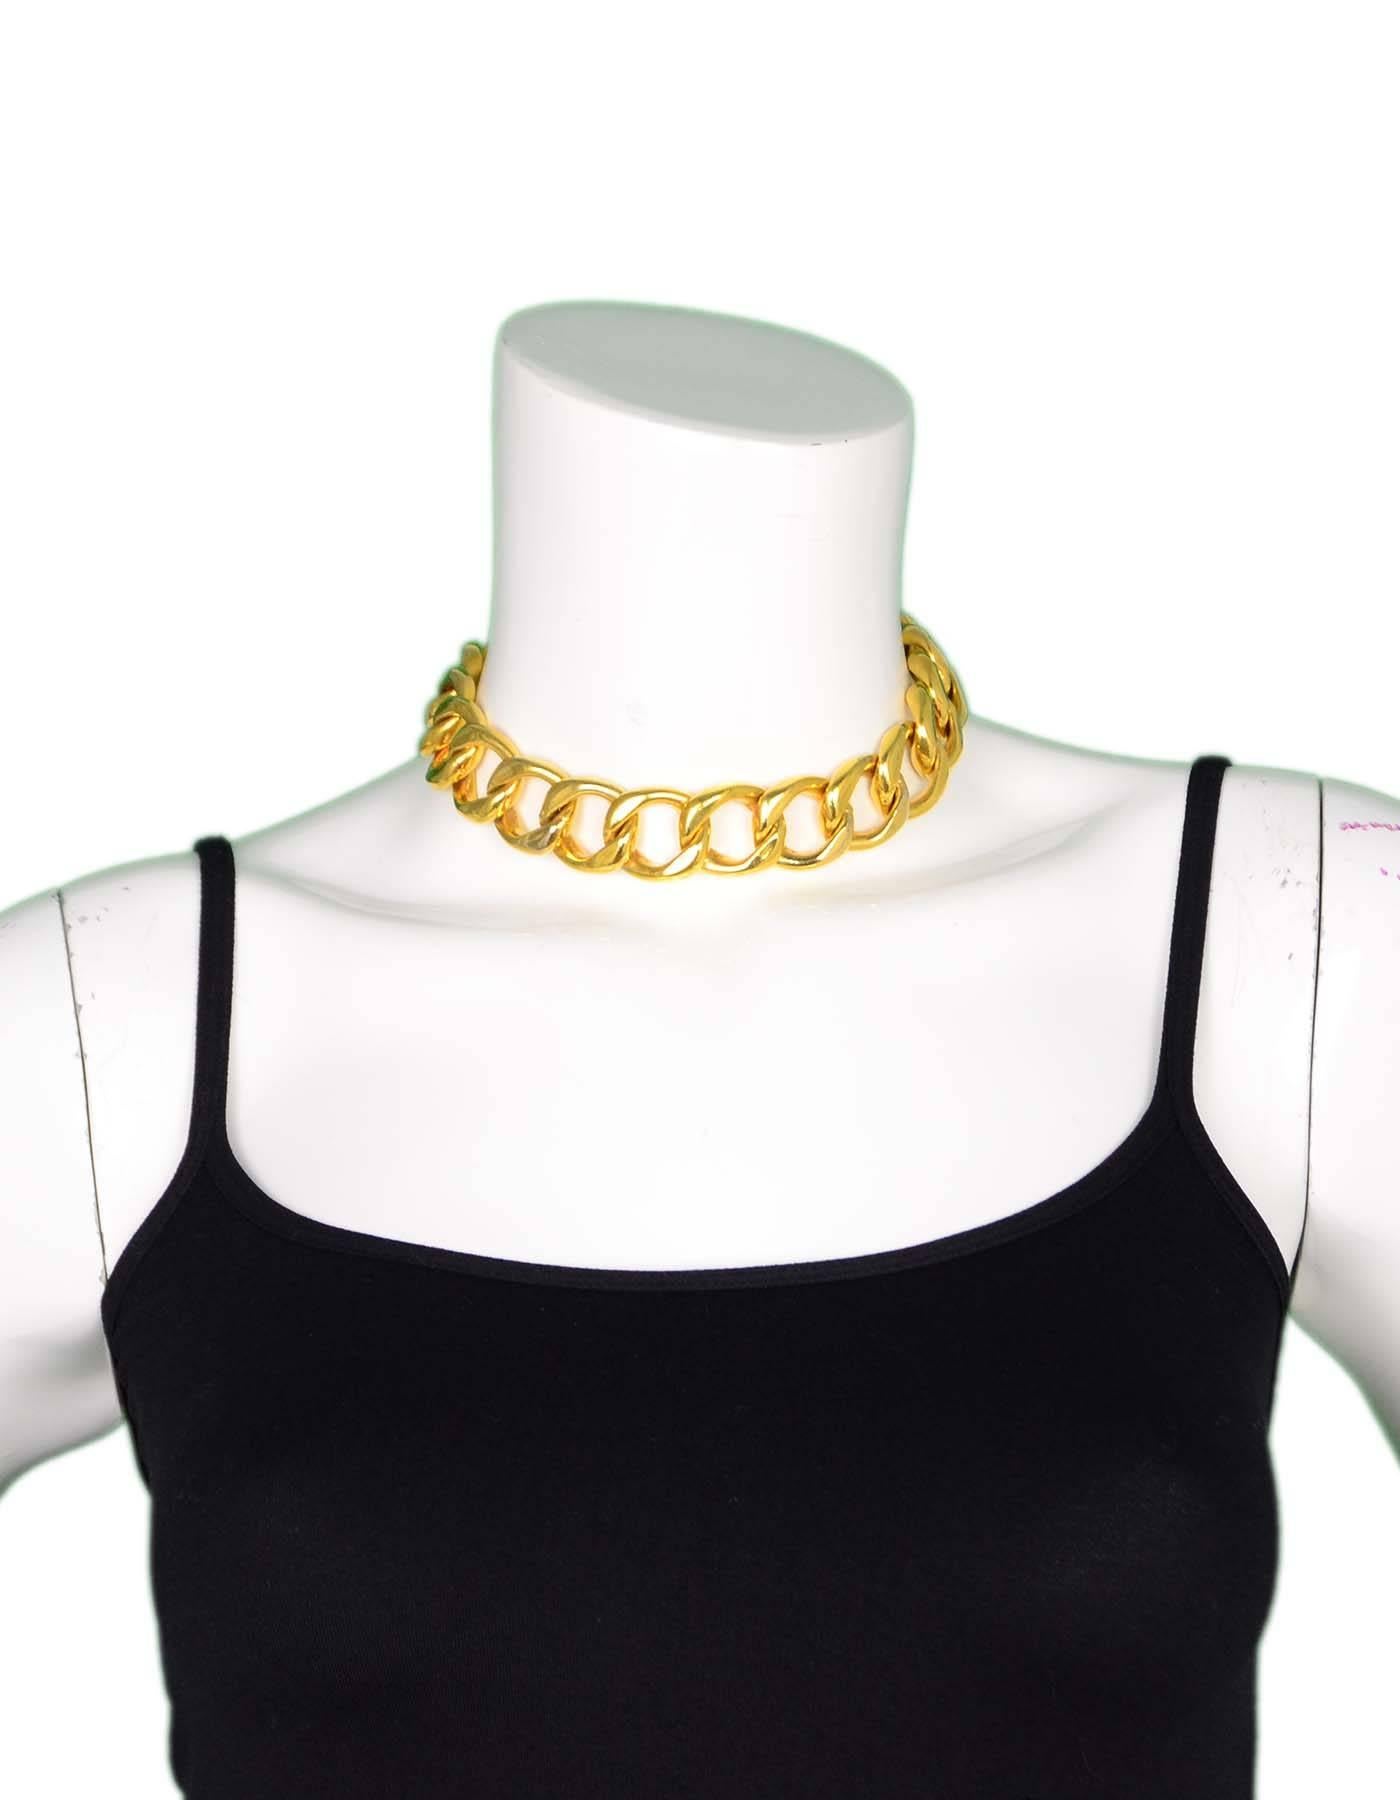 Chanel Vintage Gold-tone Chain-Link Necklace

Year of Production: 1960's
Color: Gold-tone
Materials: Metal
Closure: Hook and eye
Stamp: Chanel
Overall Condition: Very good vintage pre-owned condition, minor tarnish and surface marks